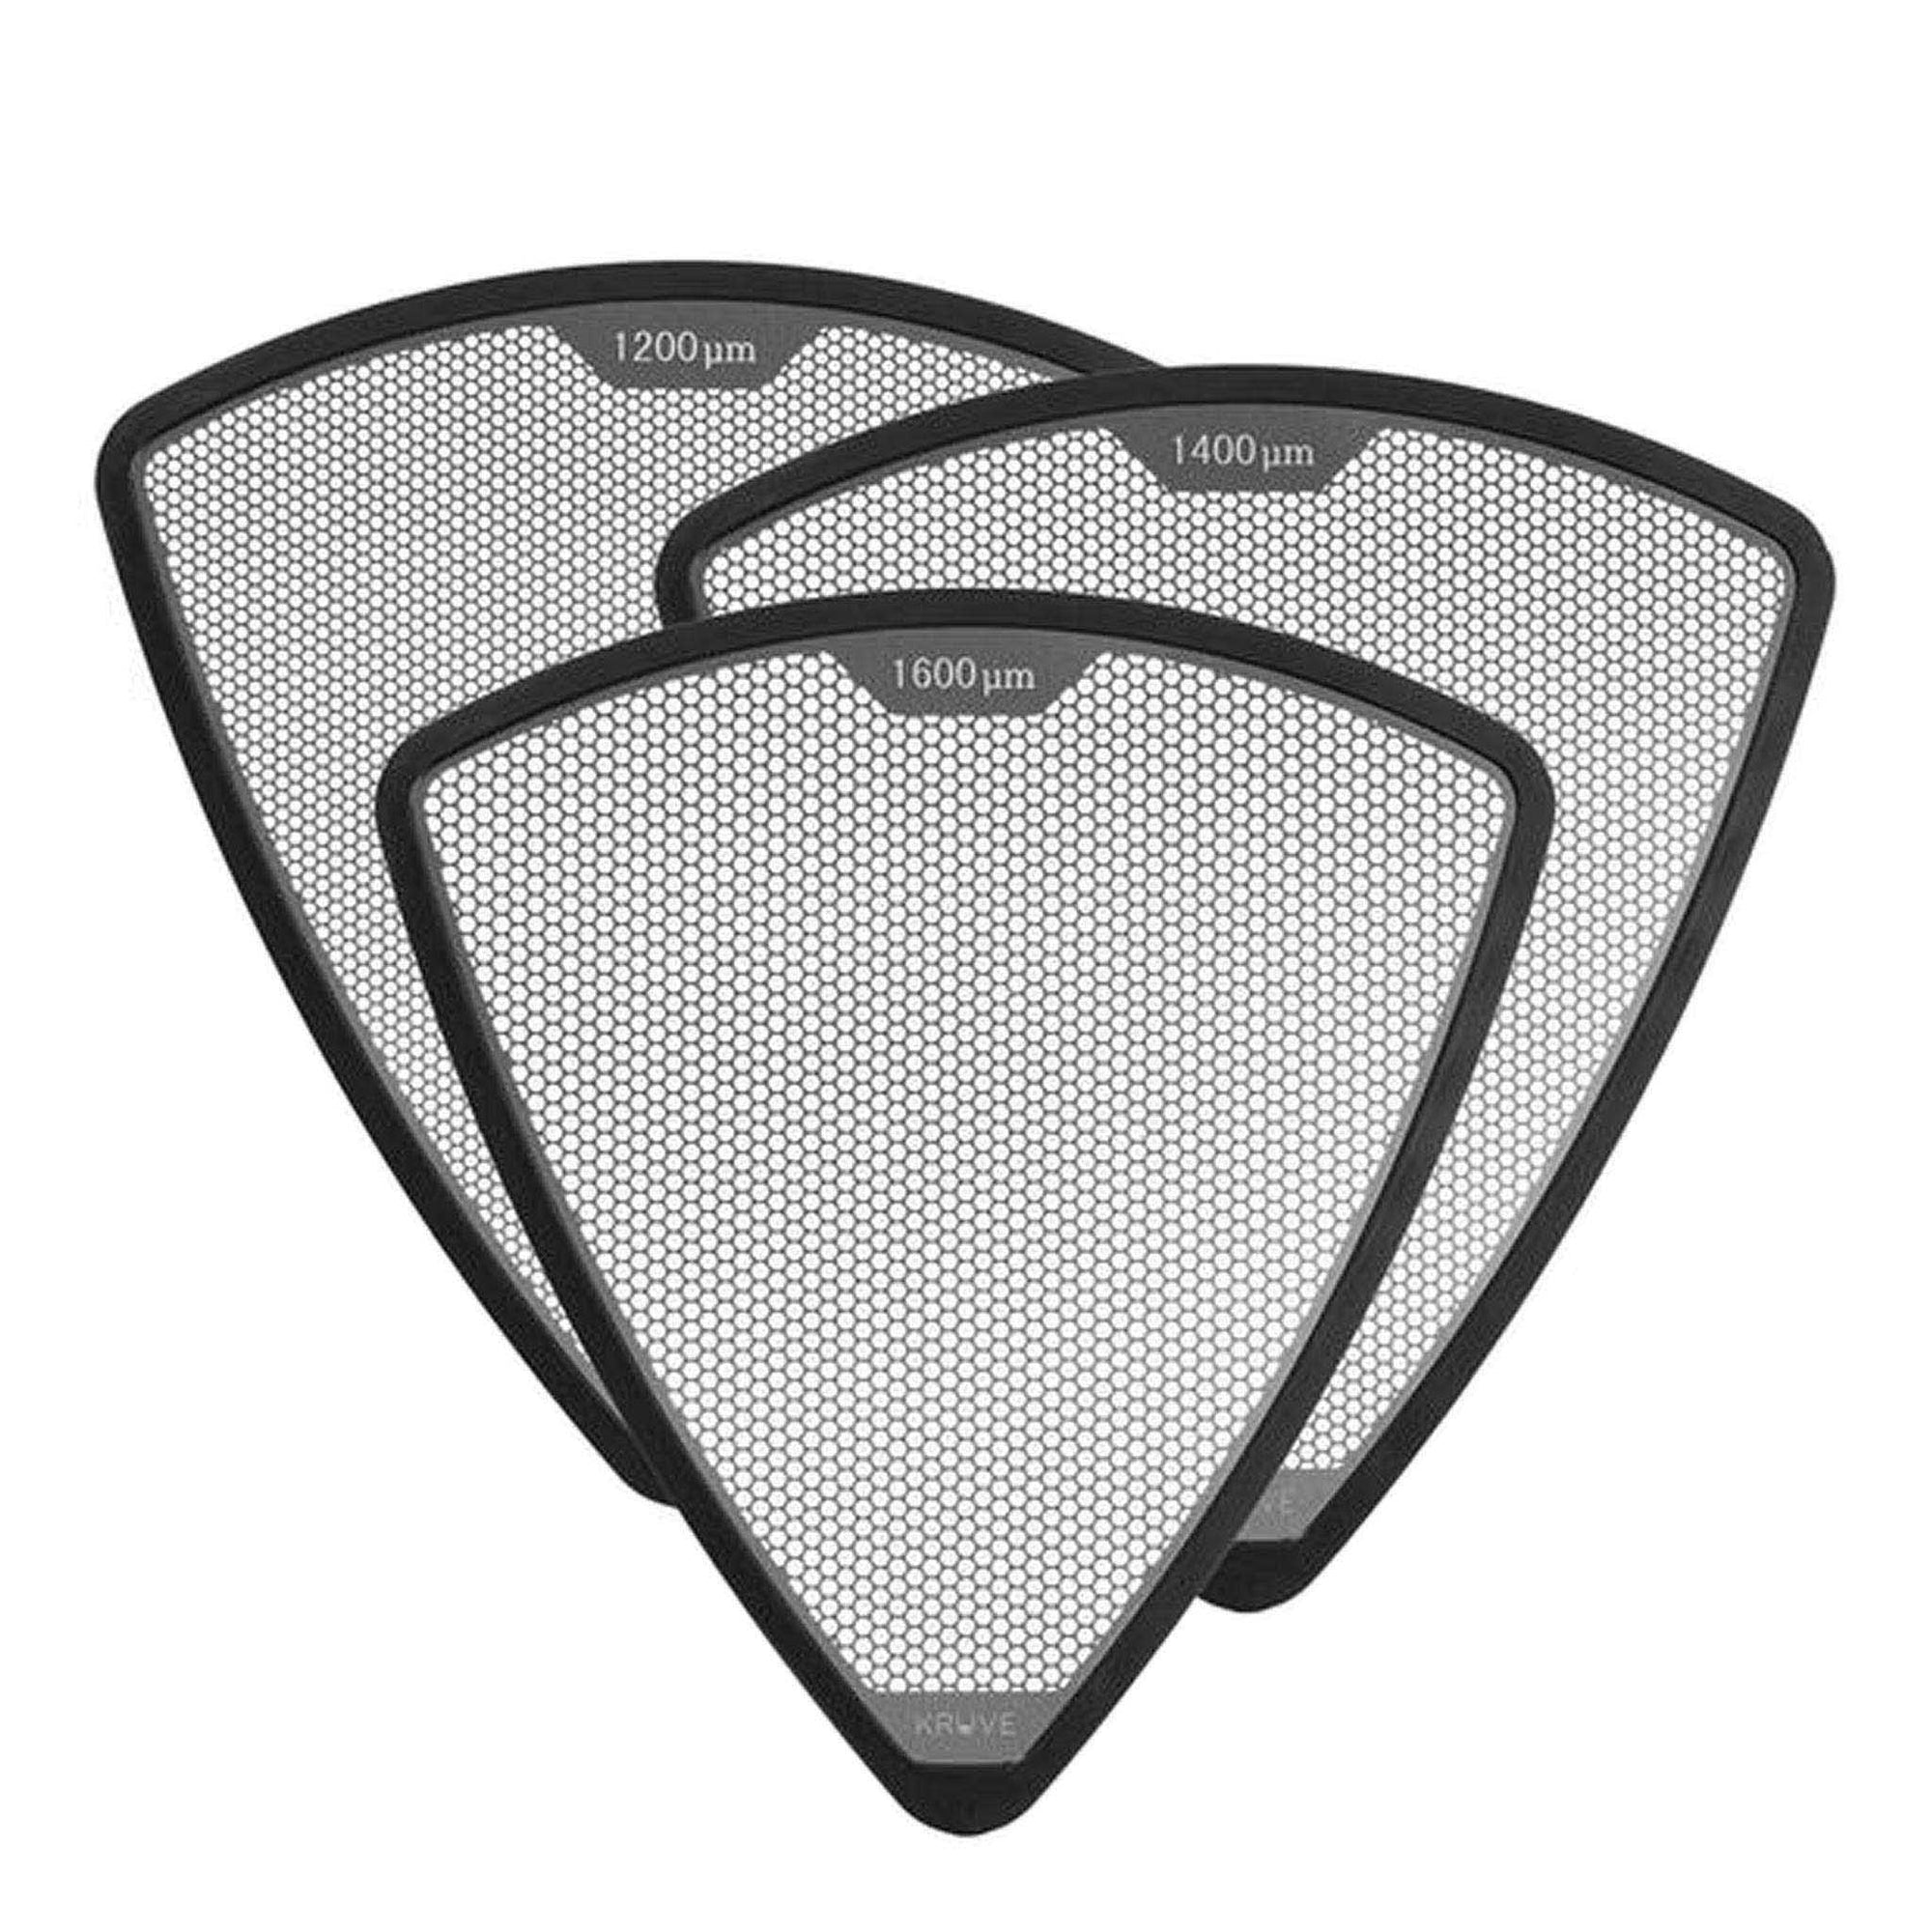 Sifter XL Upgrade Pack - 3 Sieves - Kruve